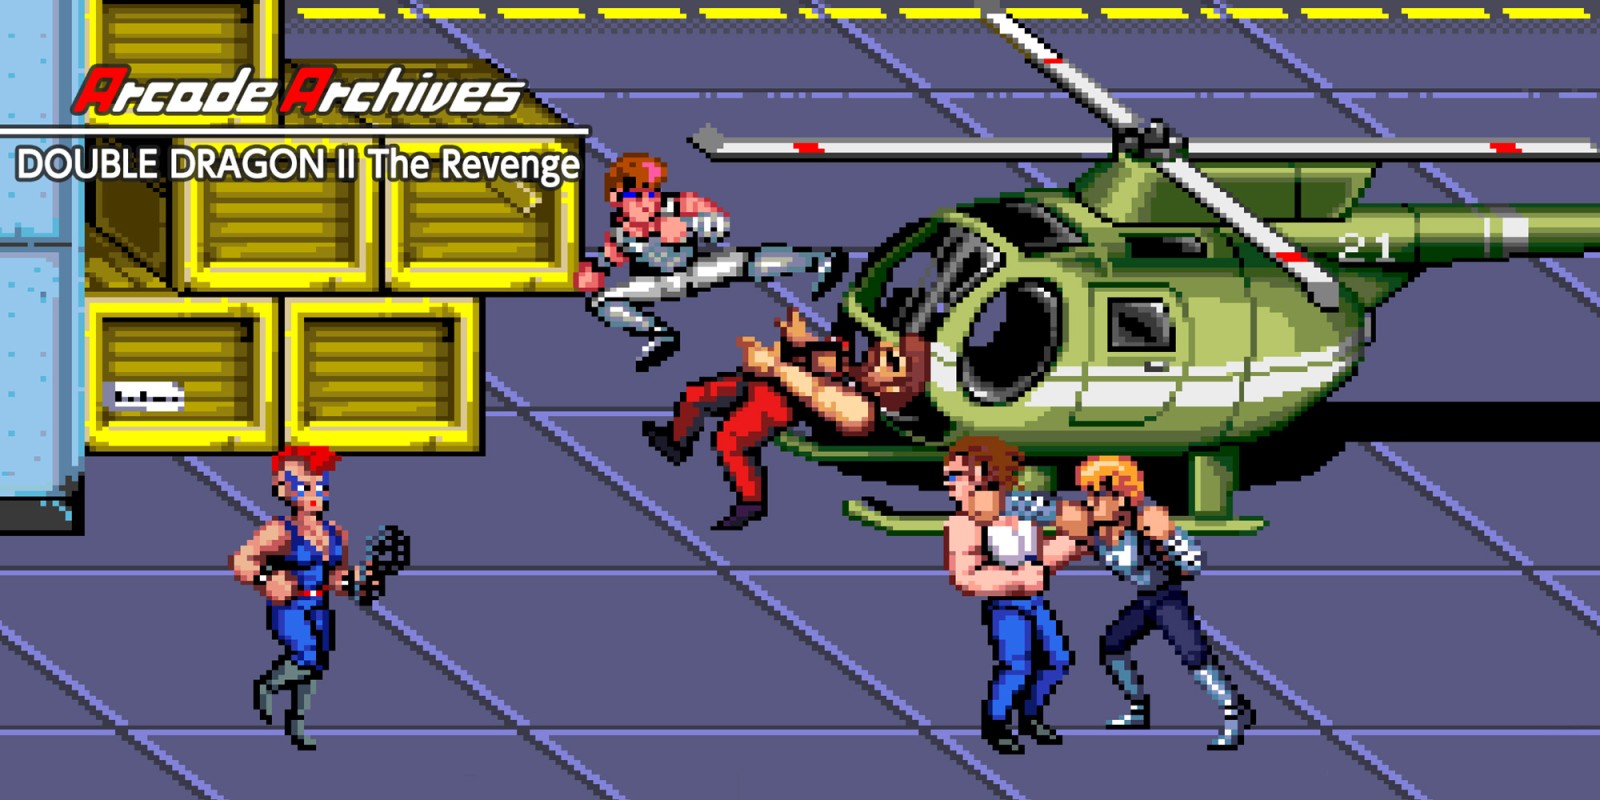 Double dragon 2 the revenge game download for android mobile